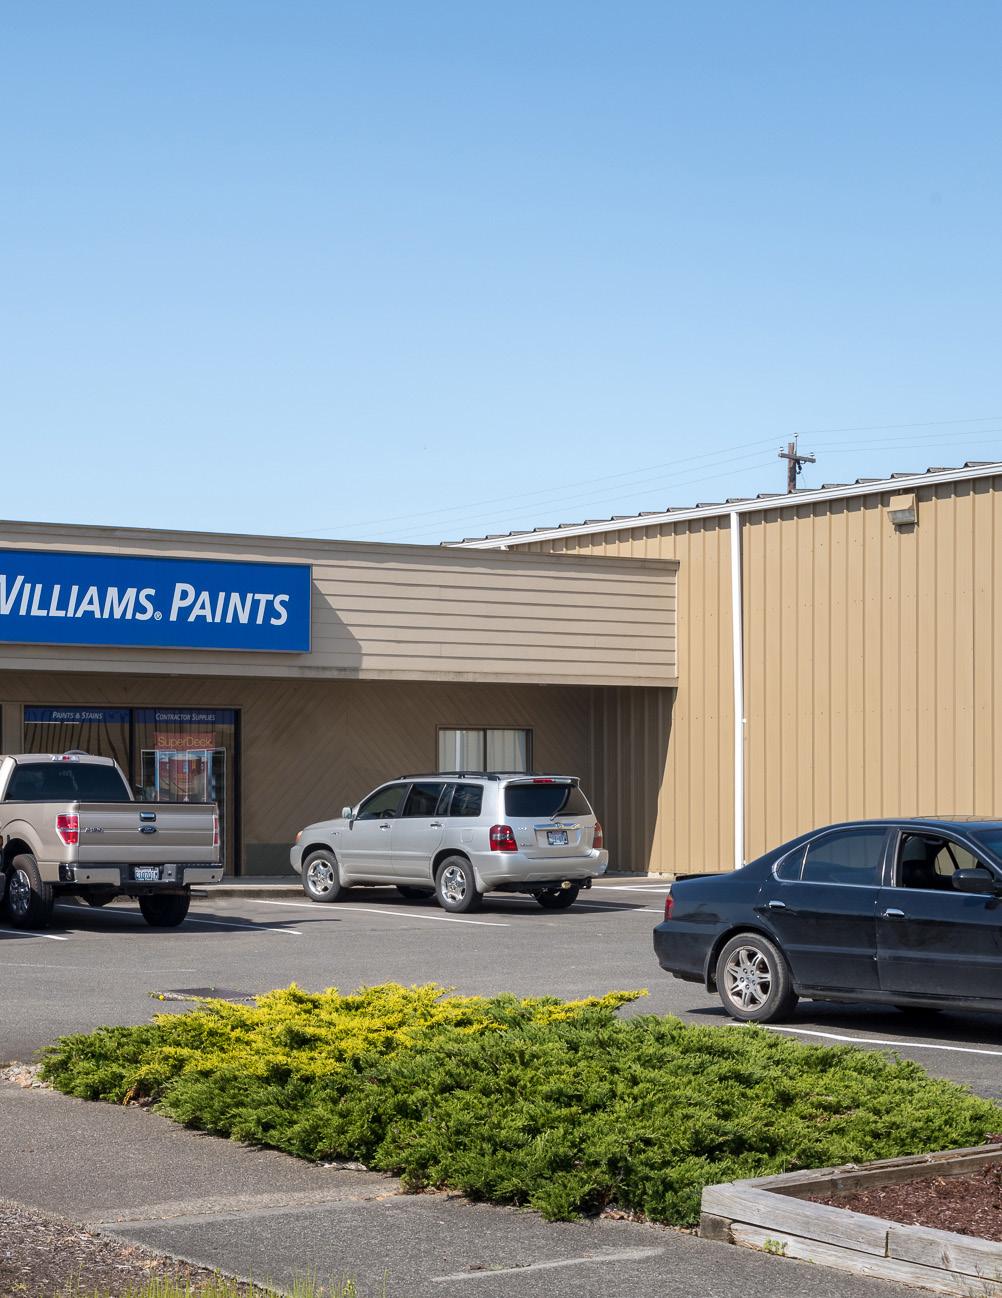 TENANT OVERVIEW Tenant Summary The Sherwin-Williams Company was founded in 1866, by Henry Sherwin and Edwards Williams, in Cleveland, Ohio.